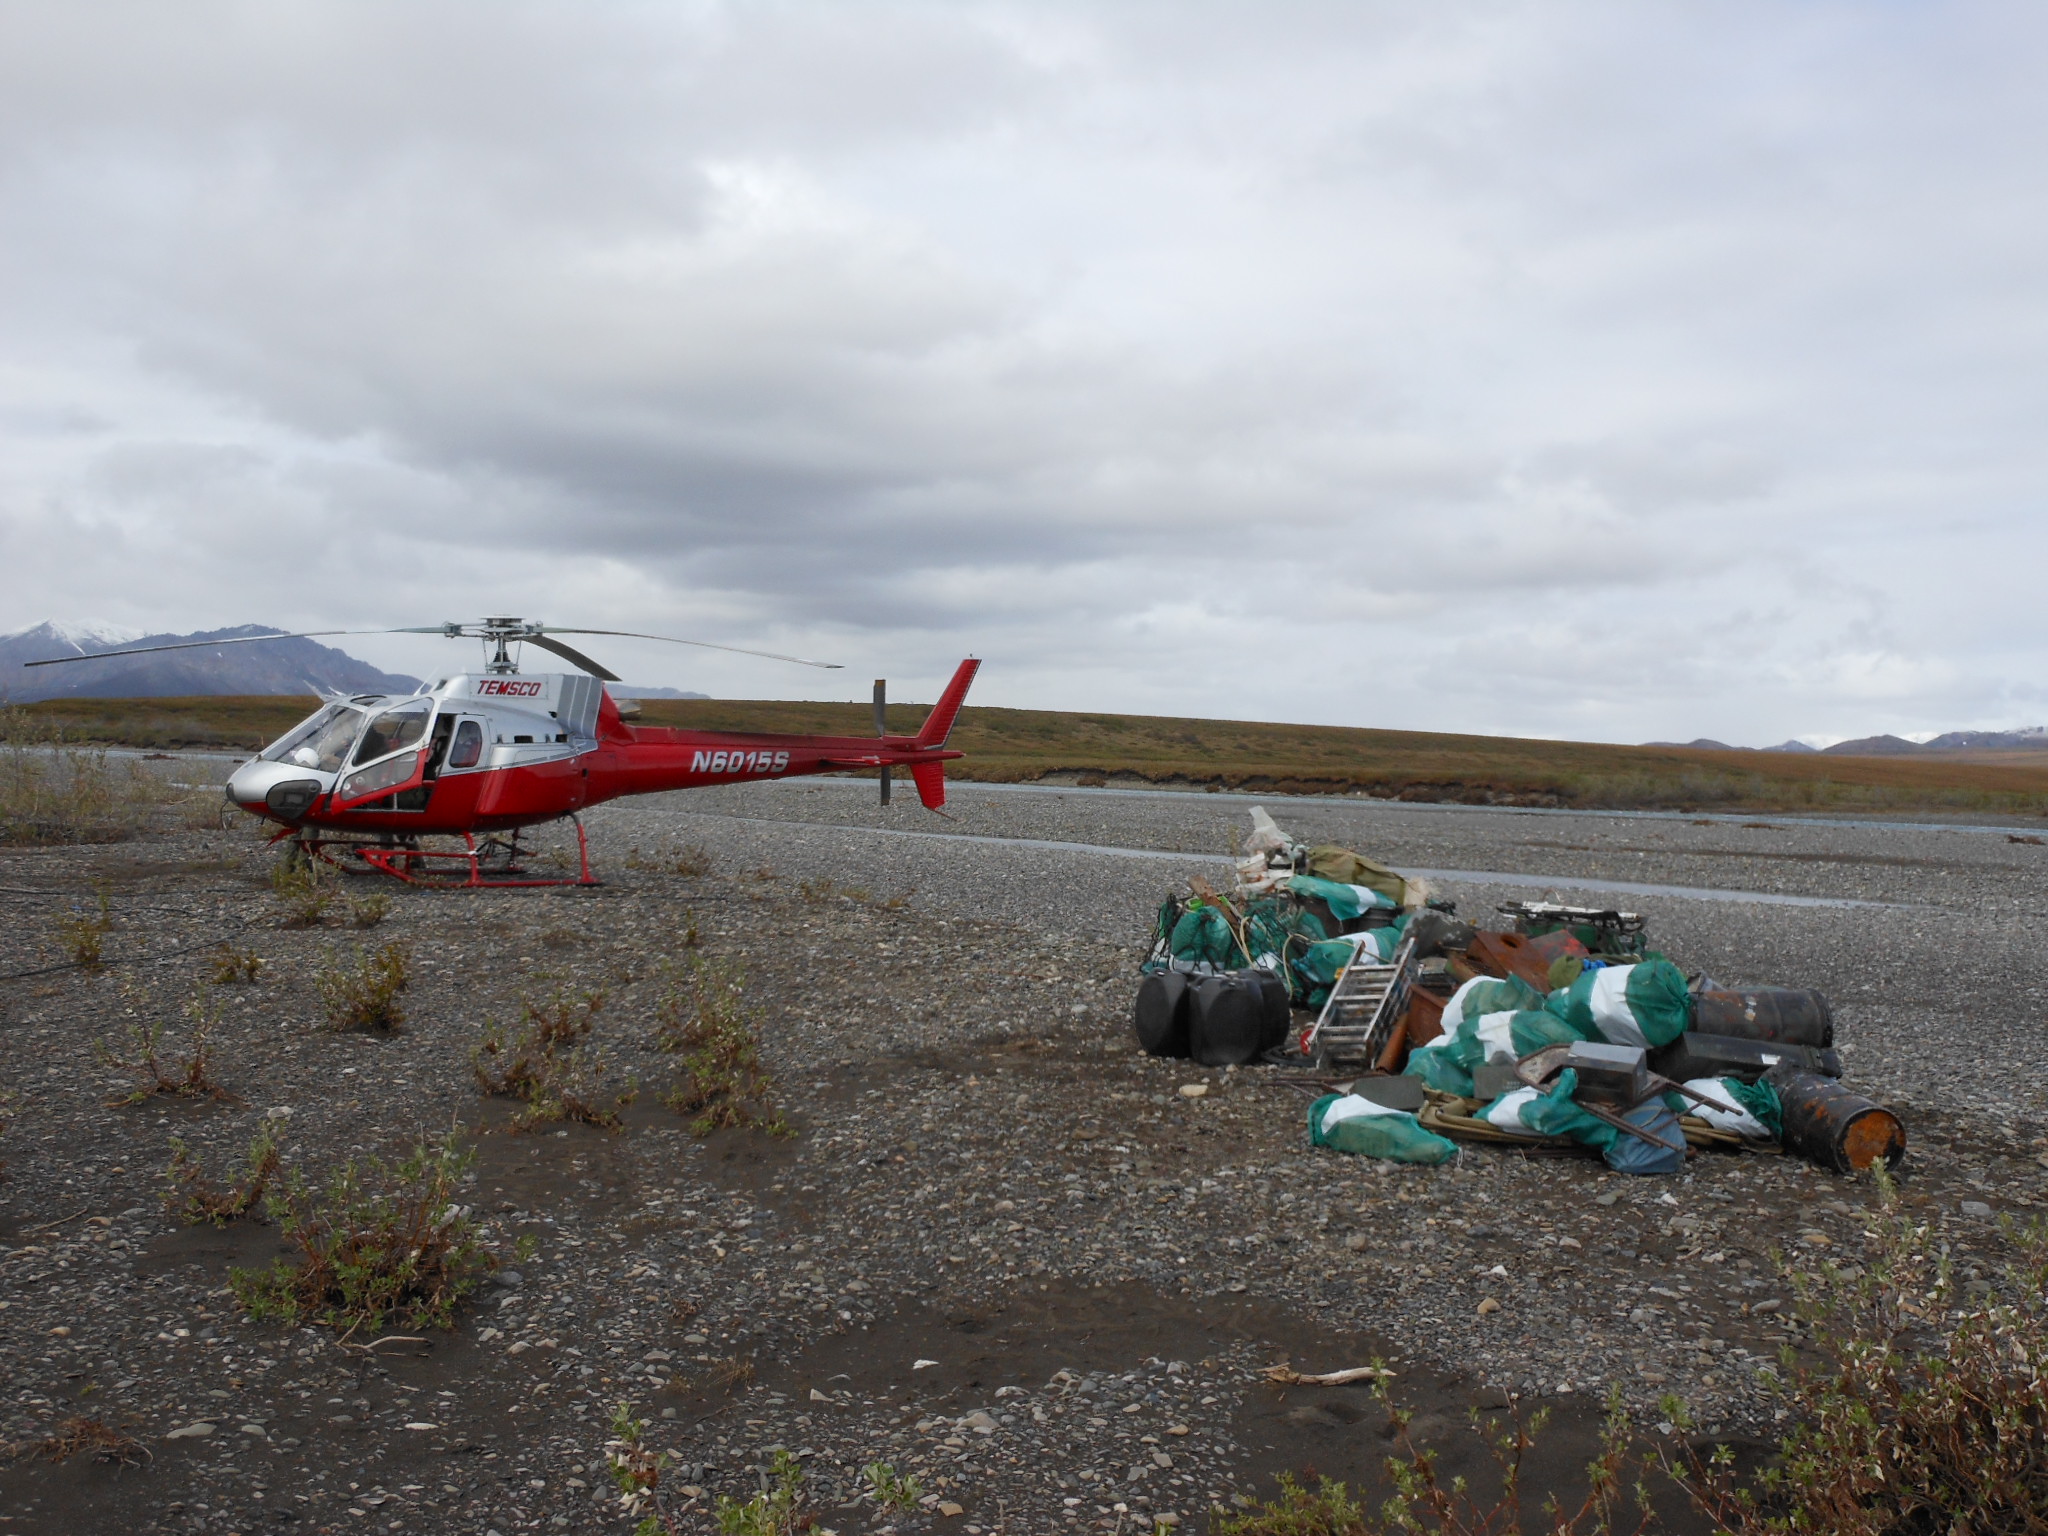 More than 3,500 pounds of equipment cached and used by the group to conduct illegal hunting outfitter operations in Noatak National Preserve were seized by ISB and USFW agents. NPS photo by the Investigative Services Branch.